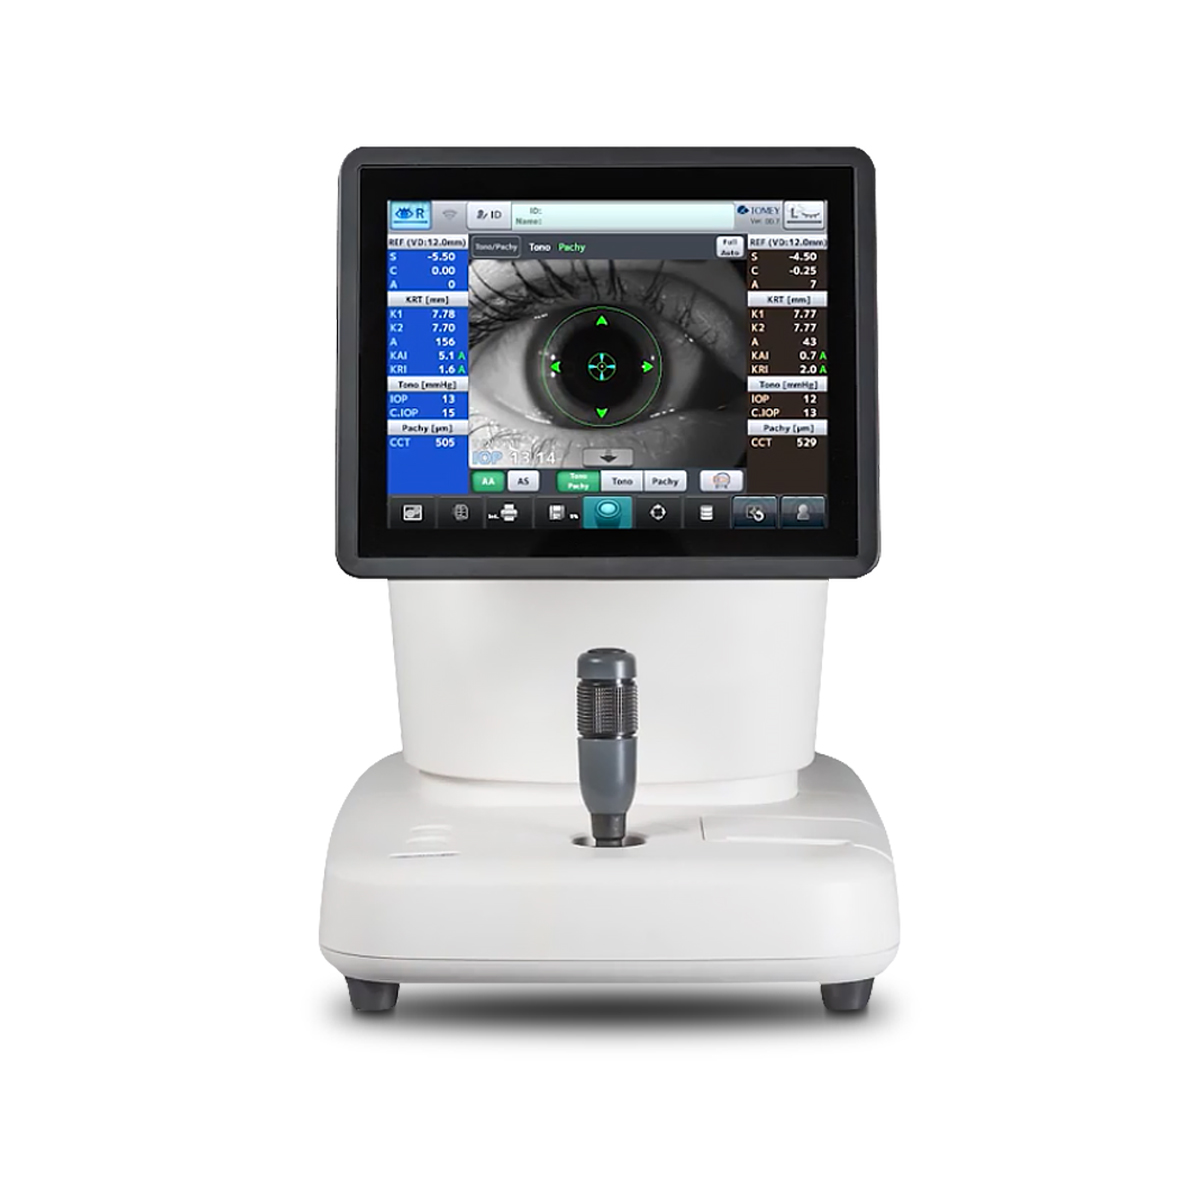 Auto Refractor and Keratometer Viewlight USA - Ophthalmic Products